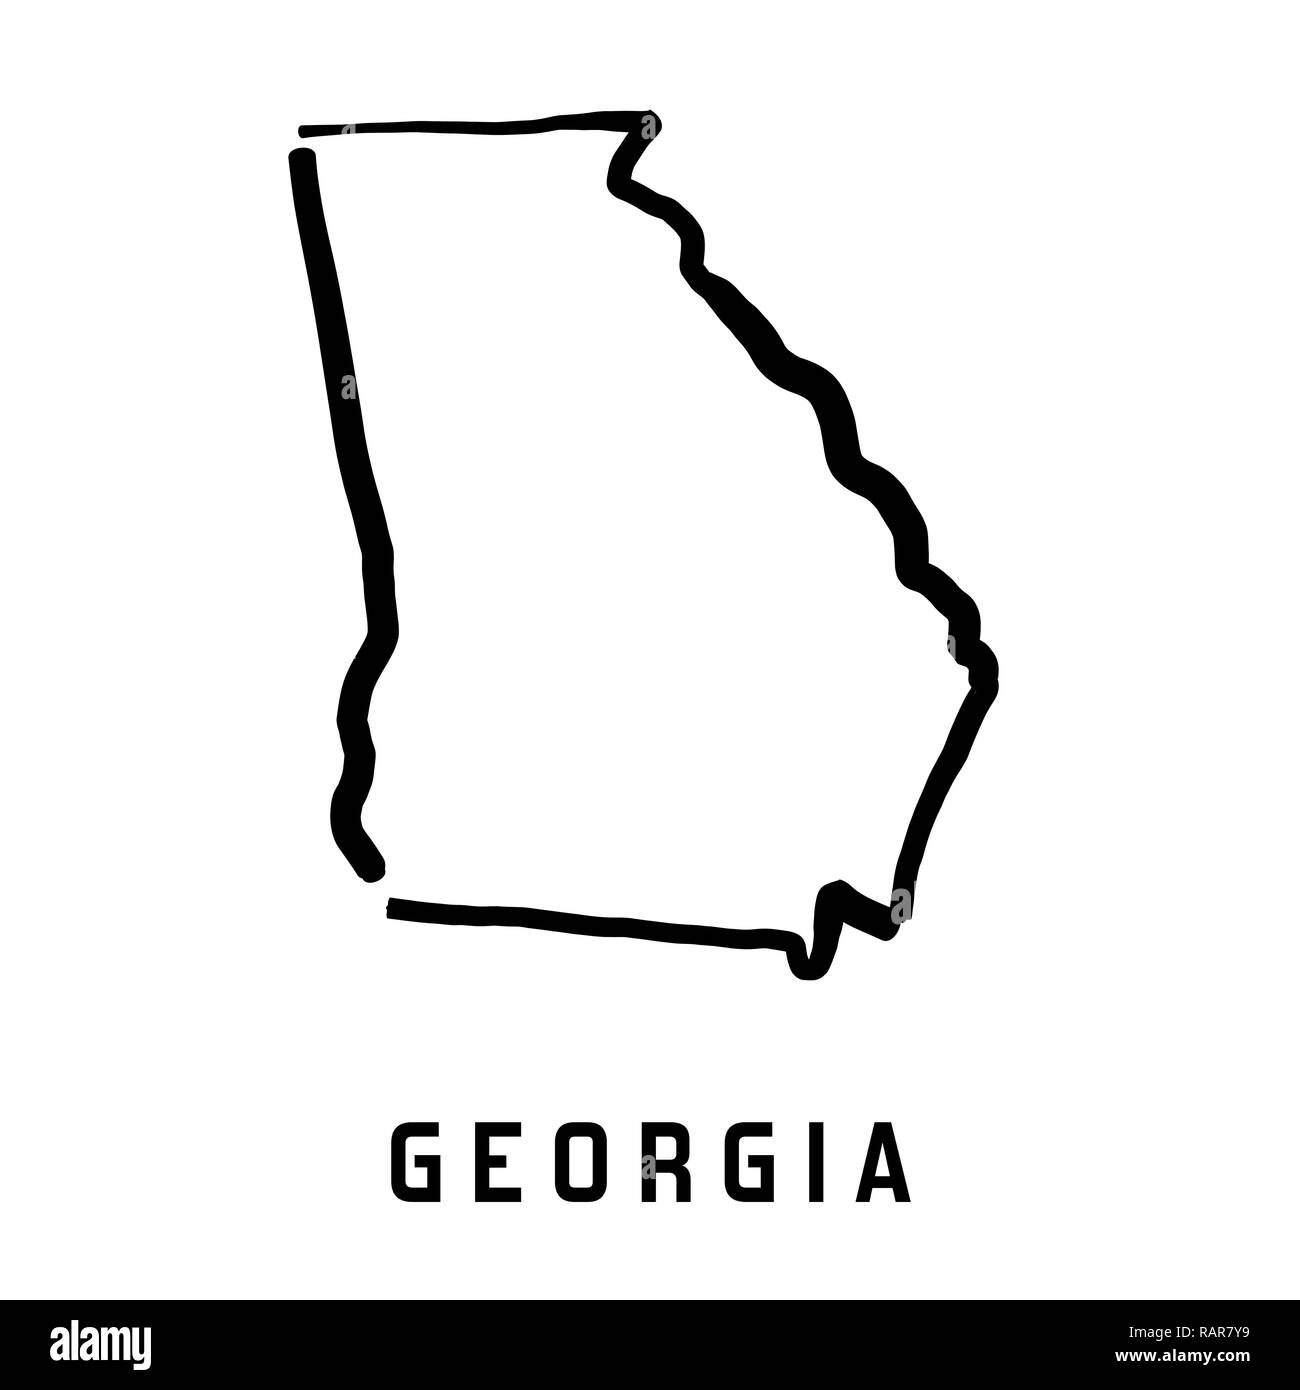 Georgia state map outline - smooth simplified US state shape map vector. Stock Vector